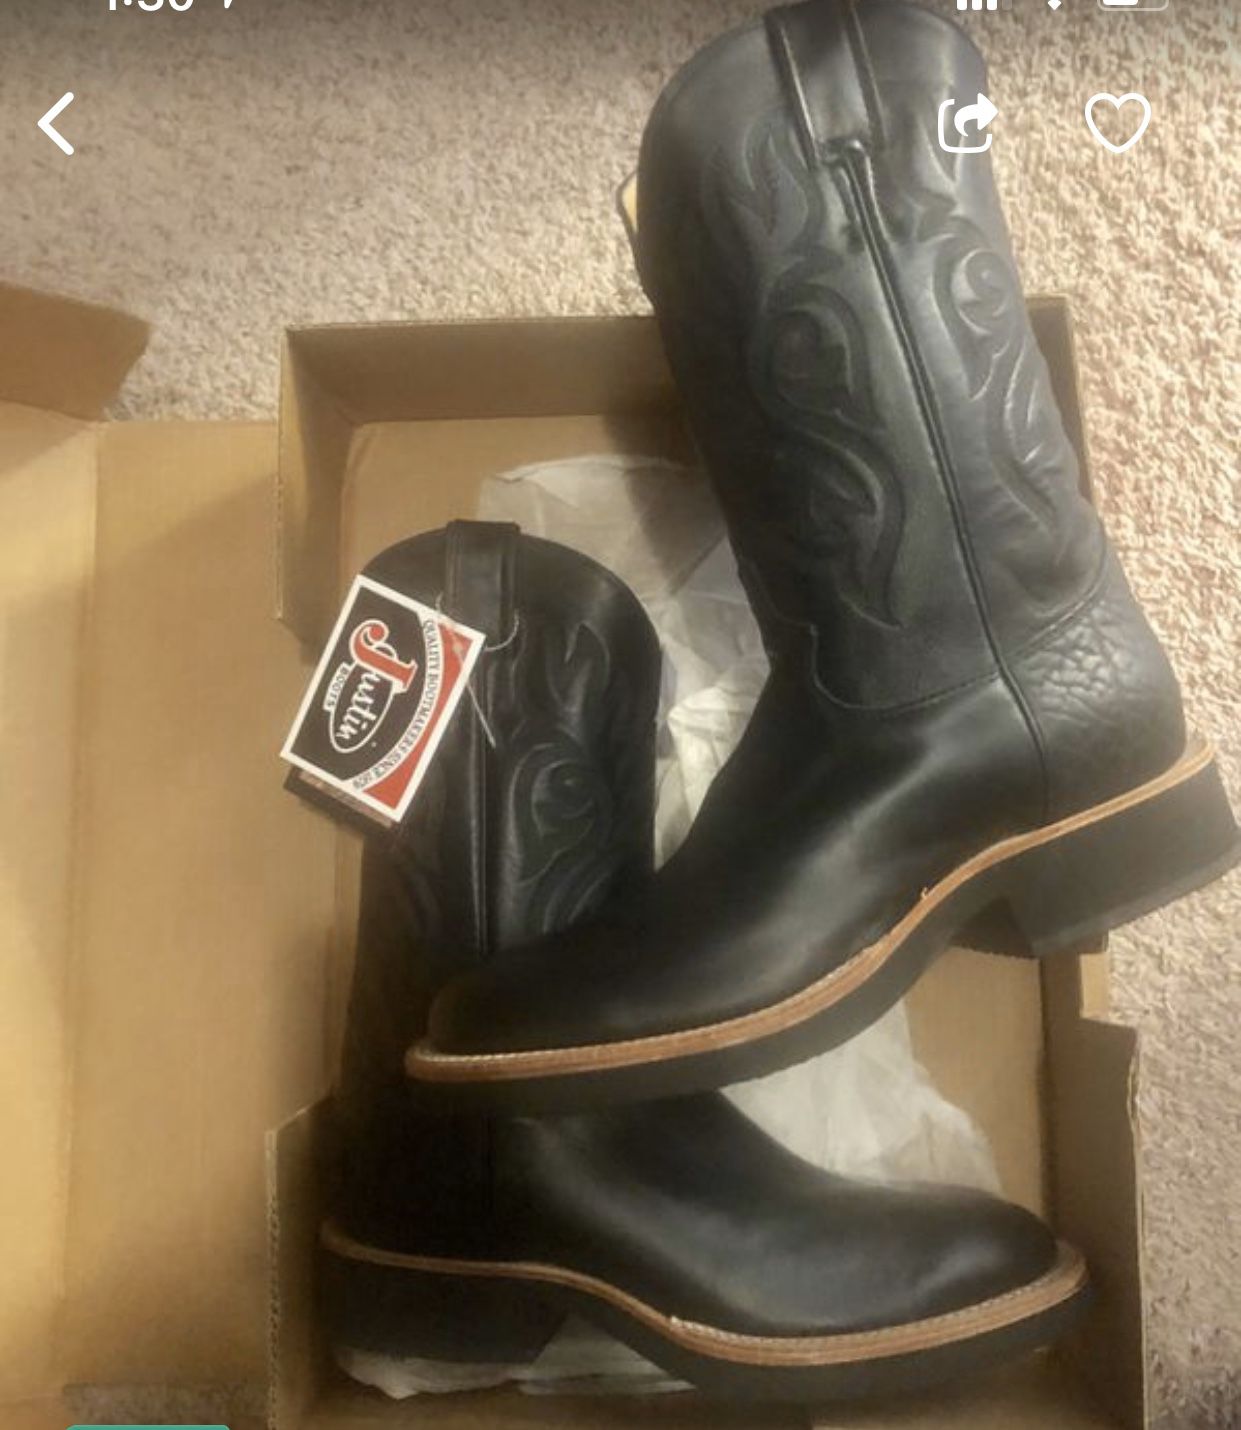 Never Used - Brand New - Justin Boots - Men - Black - Size 9D - Must Pick Up Wawa on Howland Blvd in Deltona. No Exceptions! Will Not Ship!!